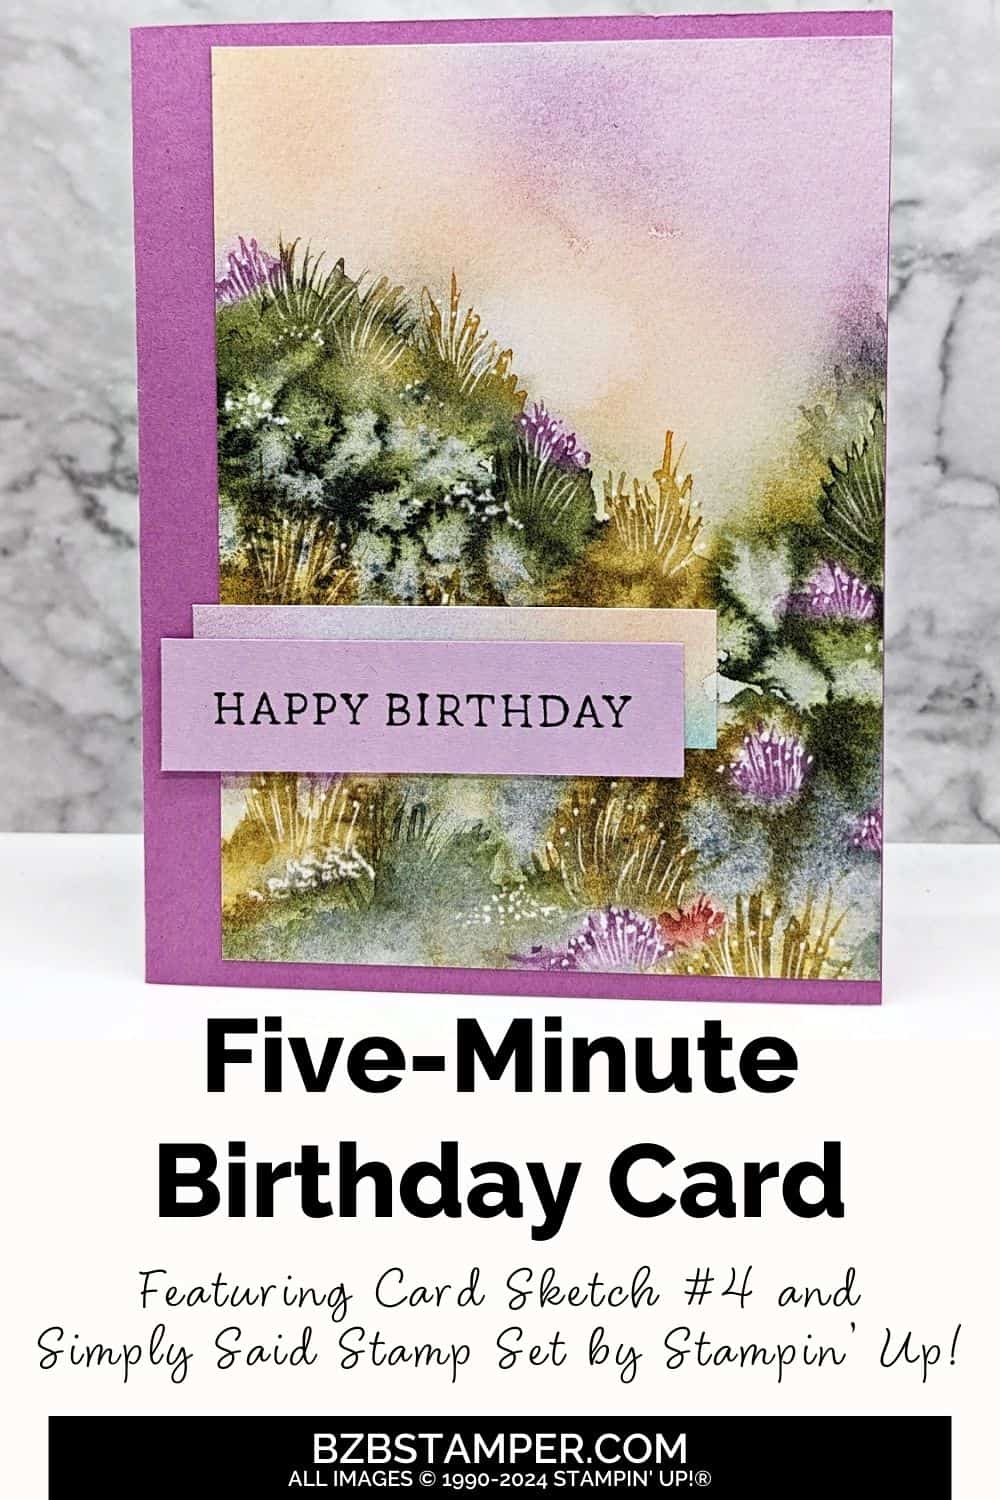 5 Minute Birthday Card Using Card Sketch 4 with nature background paper and a Happy Birthday sentiment.
